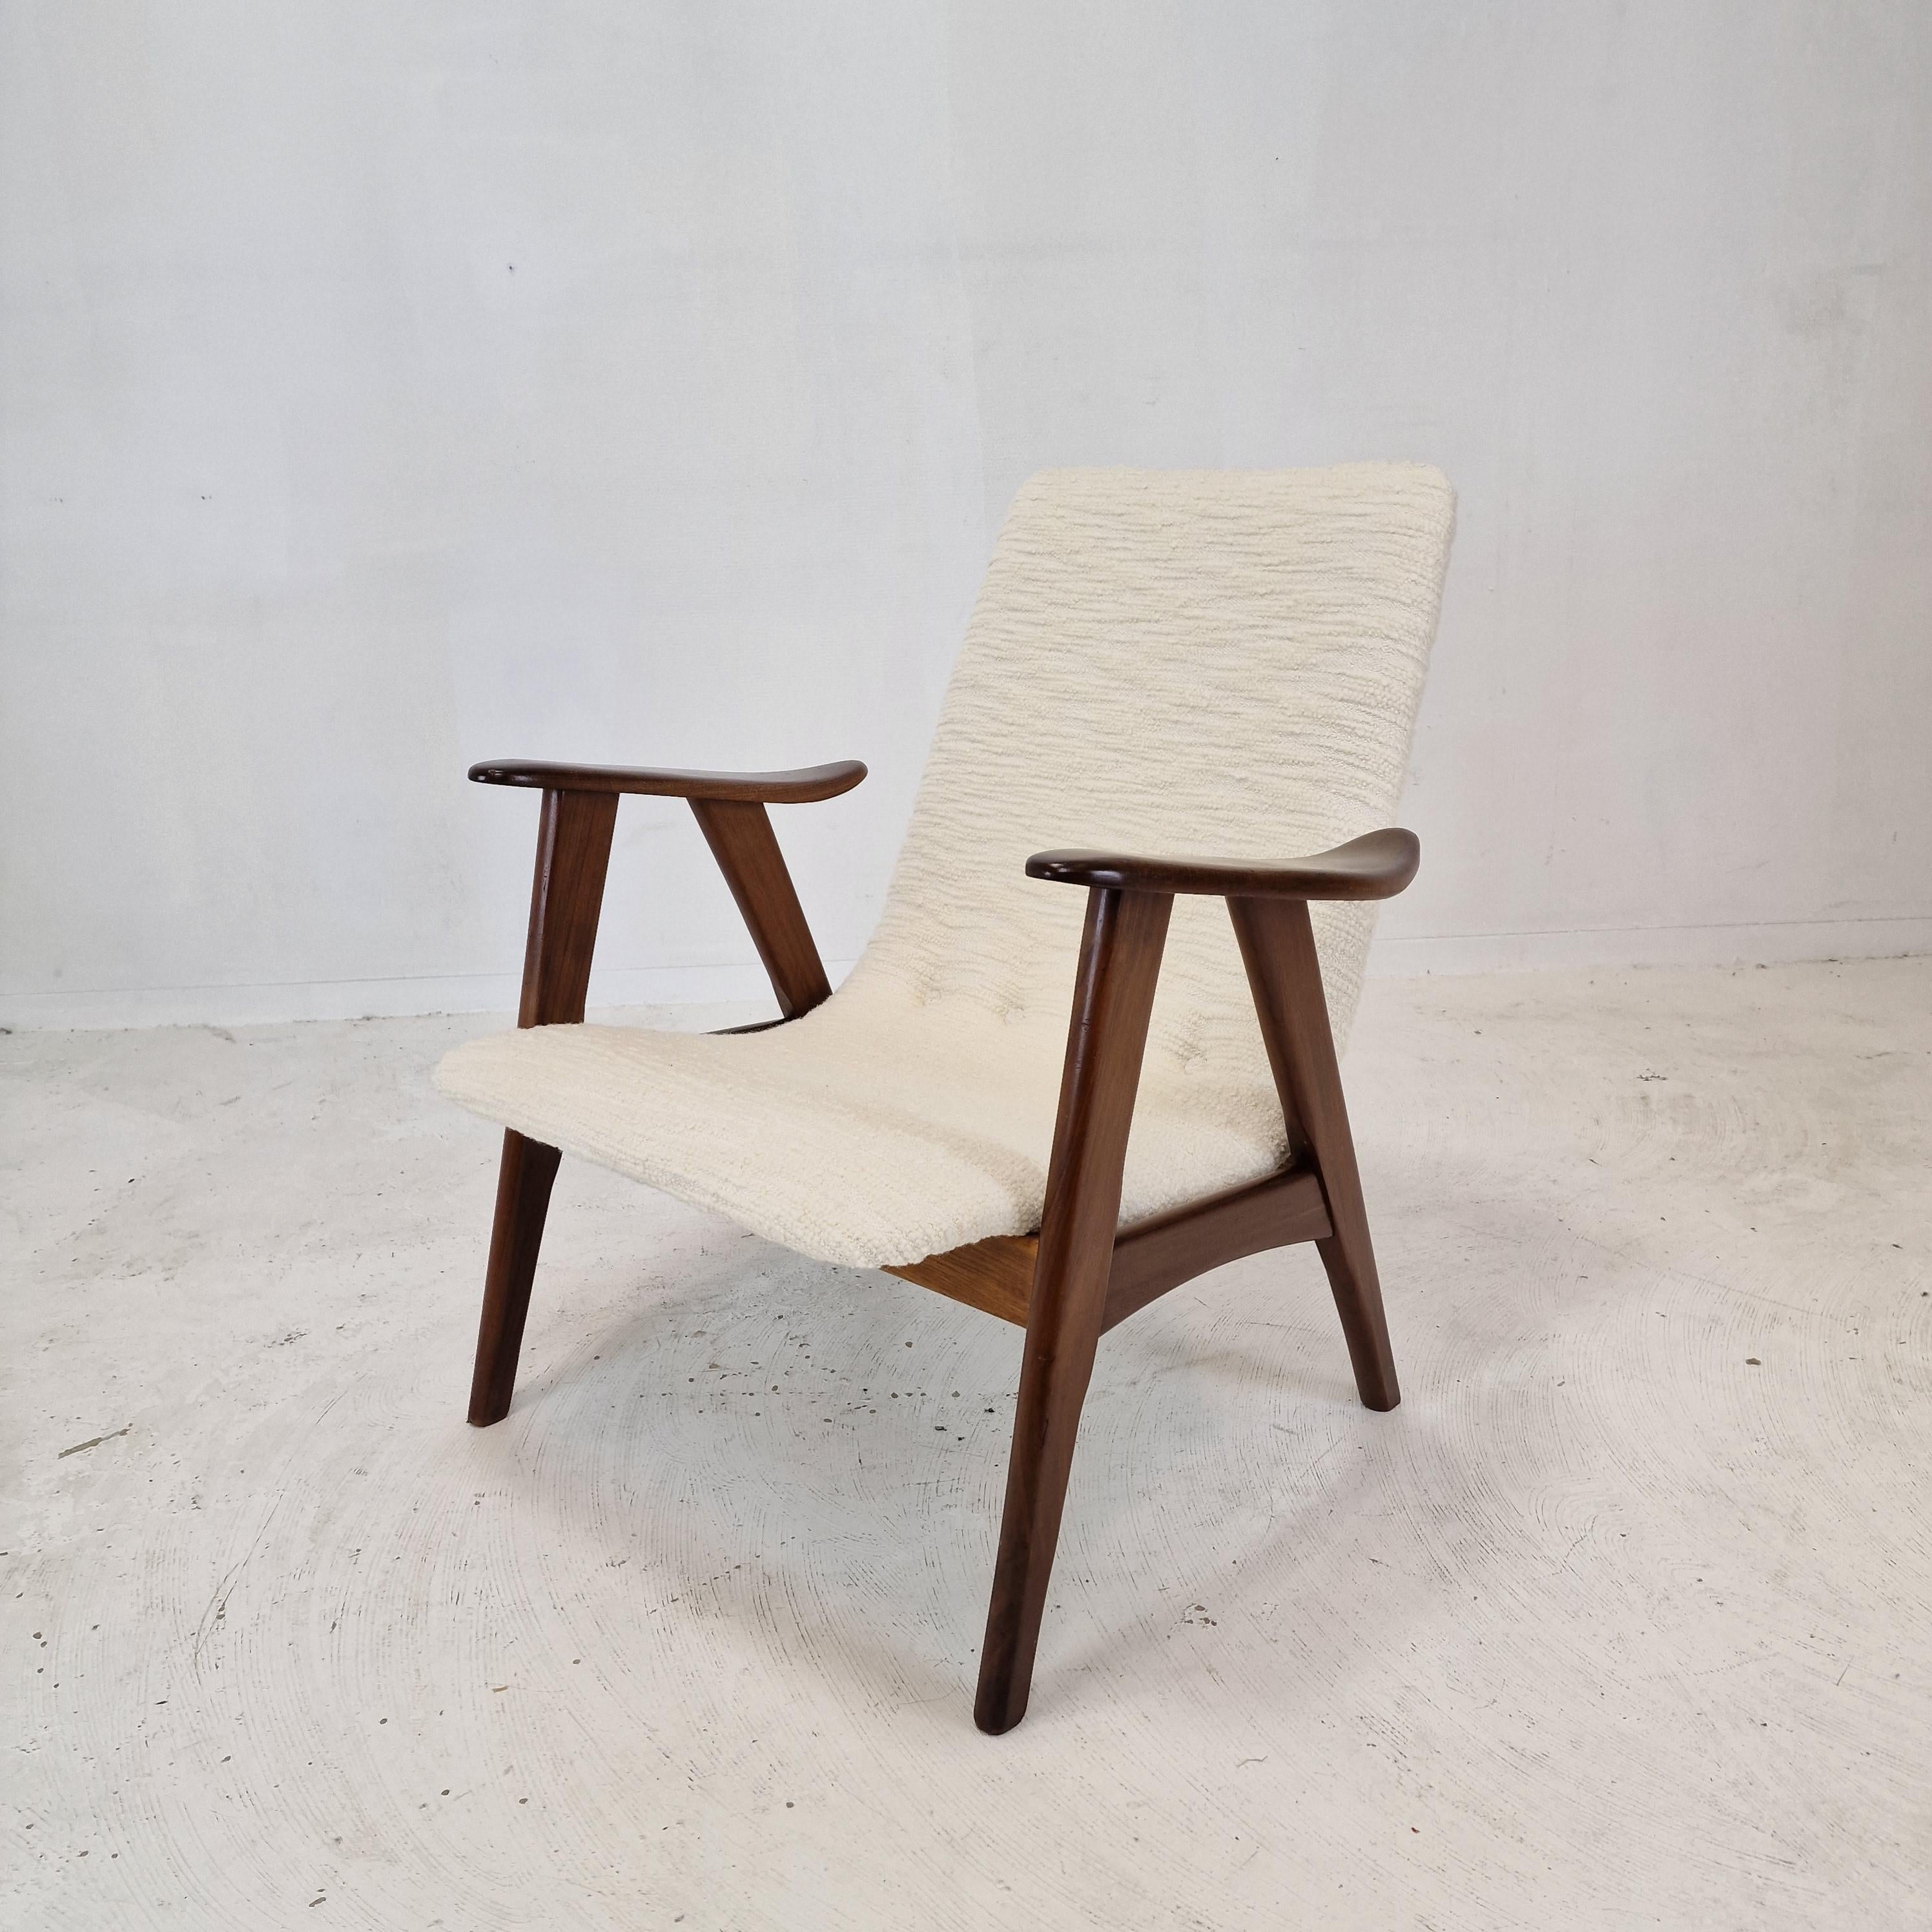 Lovely lounge chair, fabricated in the 1960s by Wébé the Netherlands.
It is designed by Louis van Teeffelen.

The elegant structure of this comfortable chairs is made of solid teak.

The chair is just restored with new foam and new fabric.
It